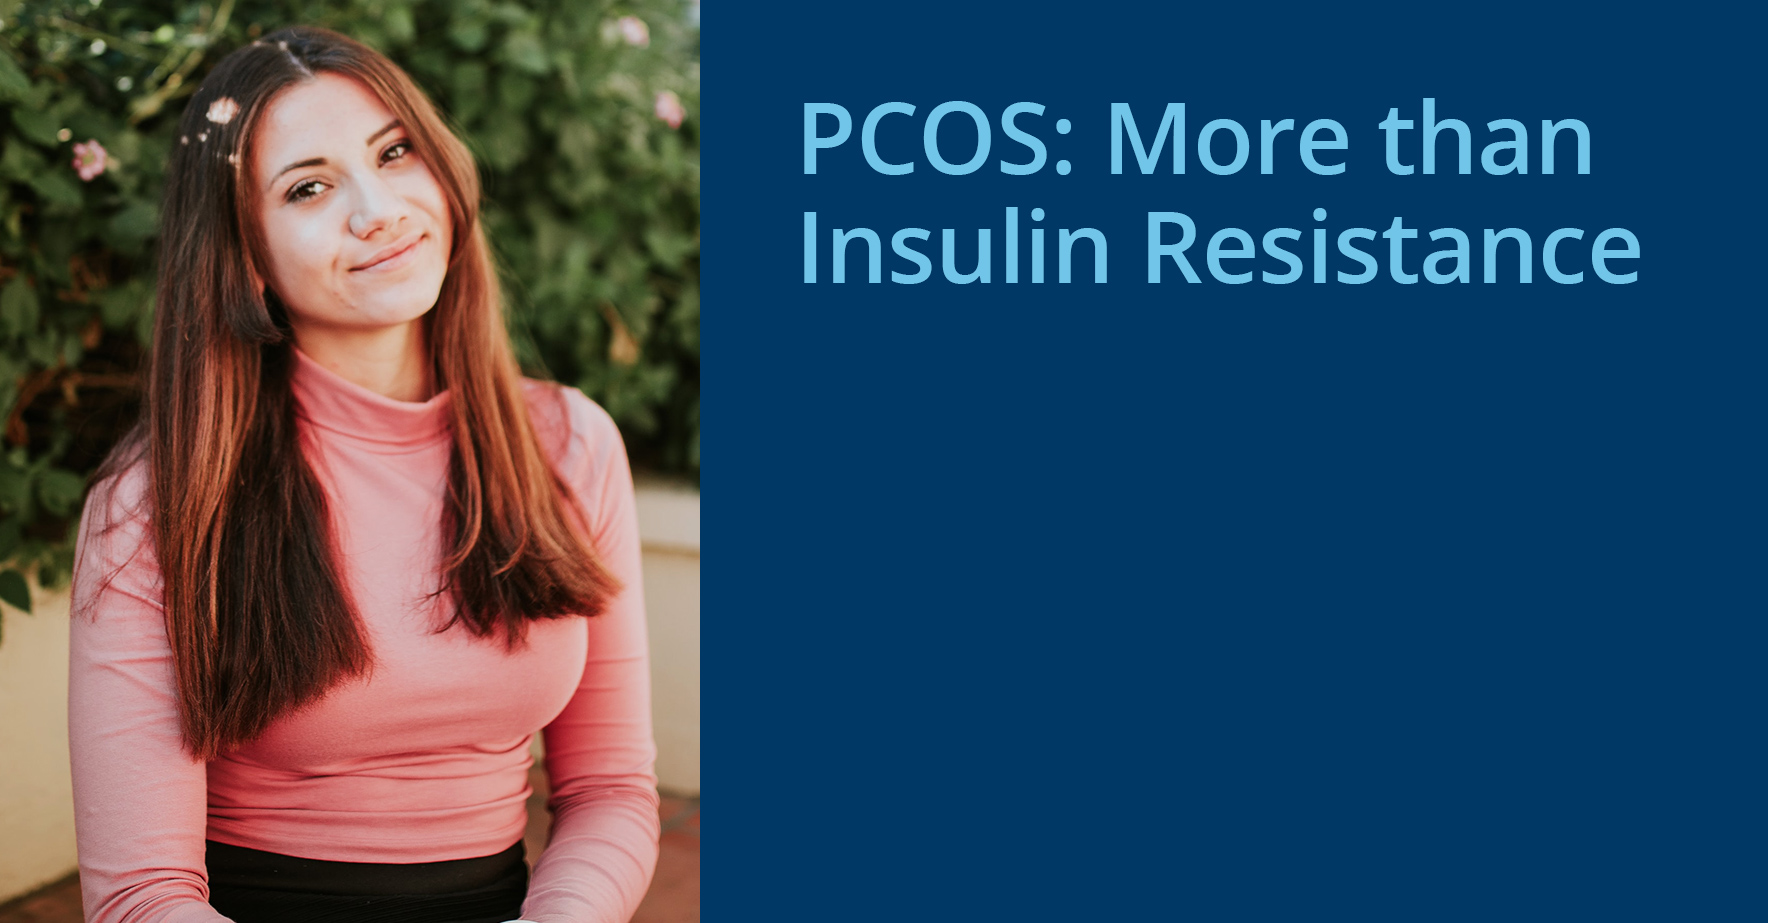 PCOS_More_than_Insulin_Resistance.jpg